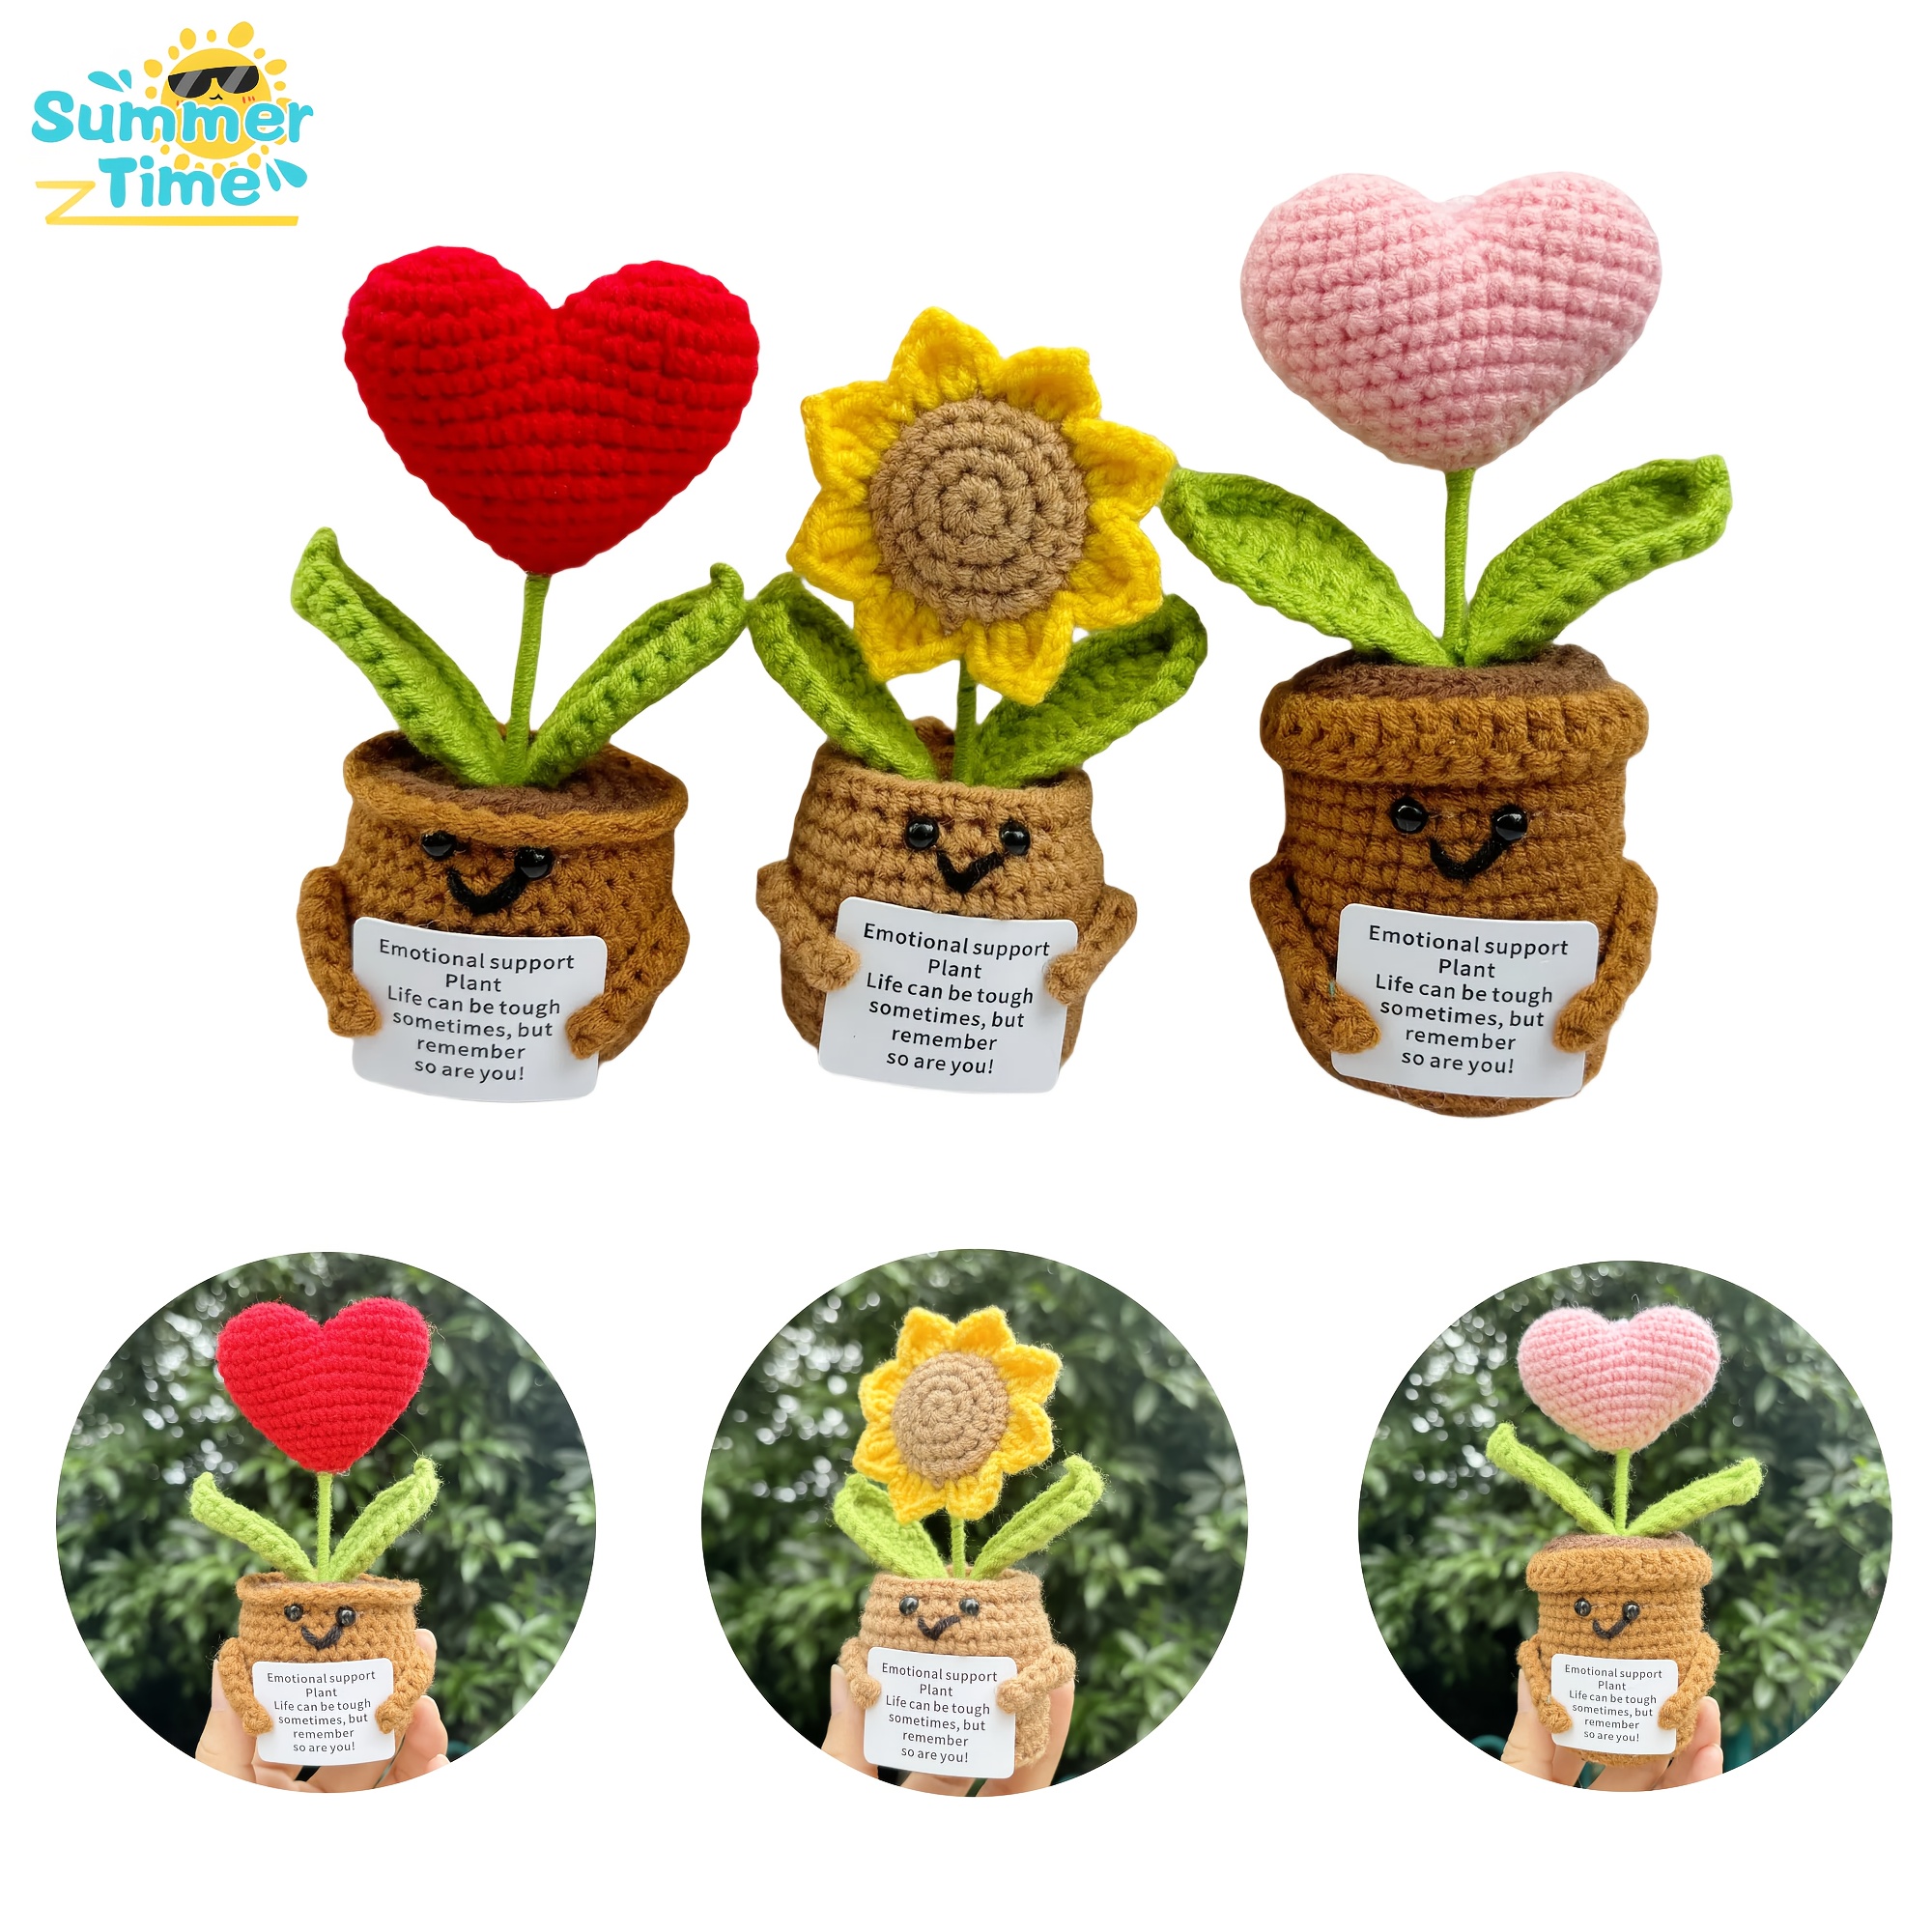 

Handcrafted Crochet Heart & Sunflower Plants - Inspirational "be Tough" Cards Included, Perfect For Couples, Friends, And Teachers - Ideal For Home, Office, Or Car Decor